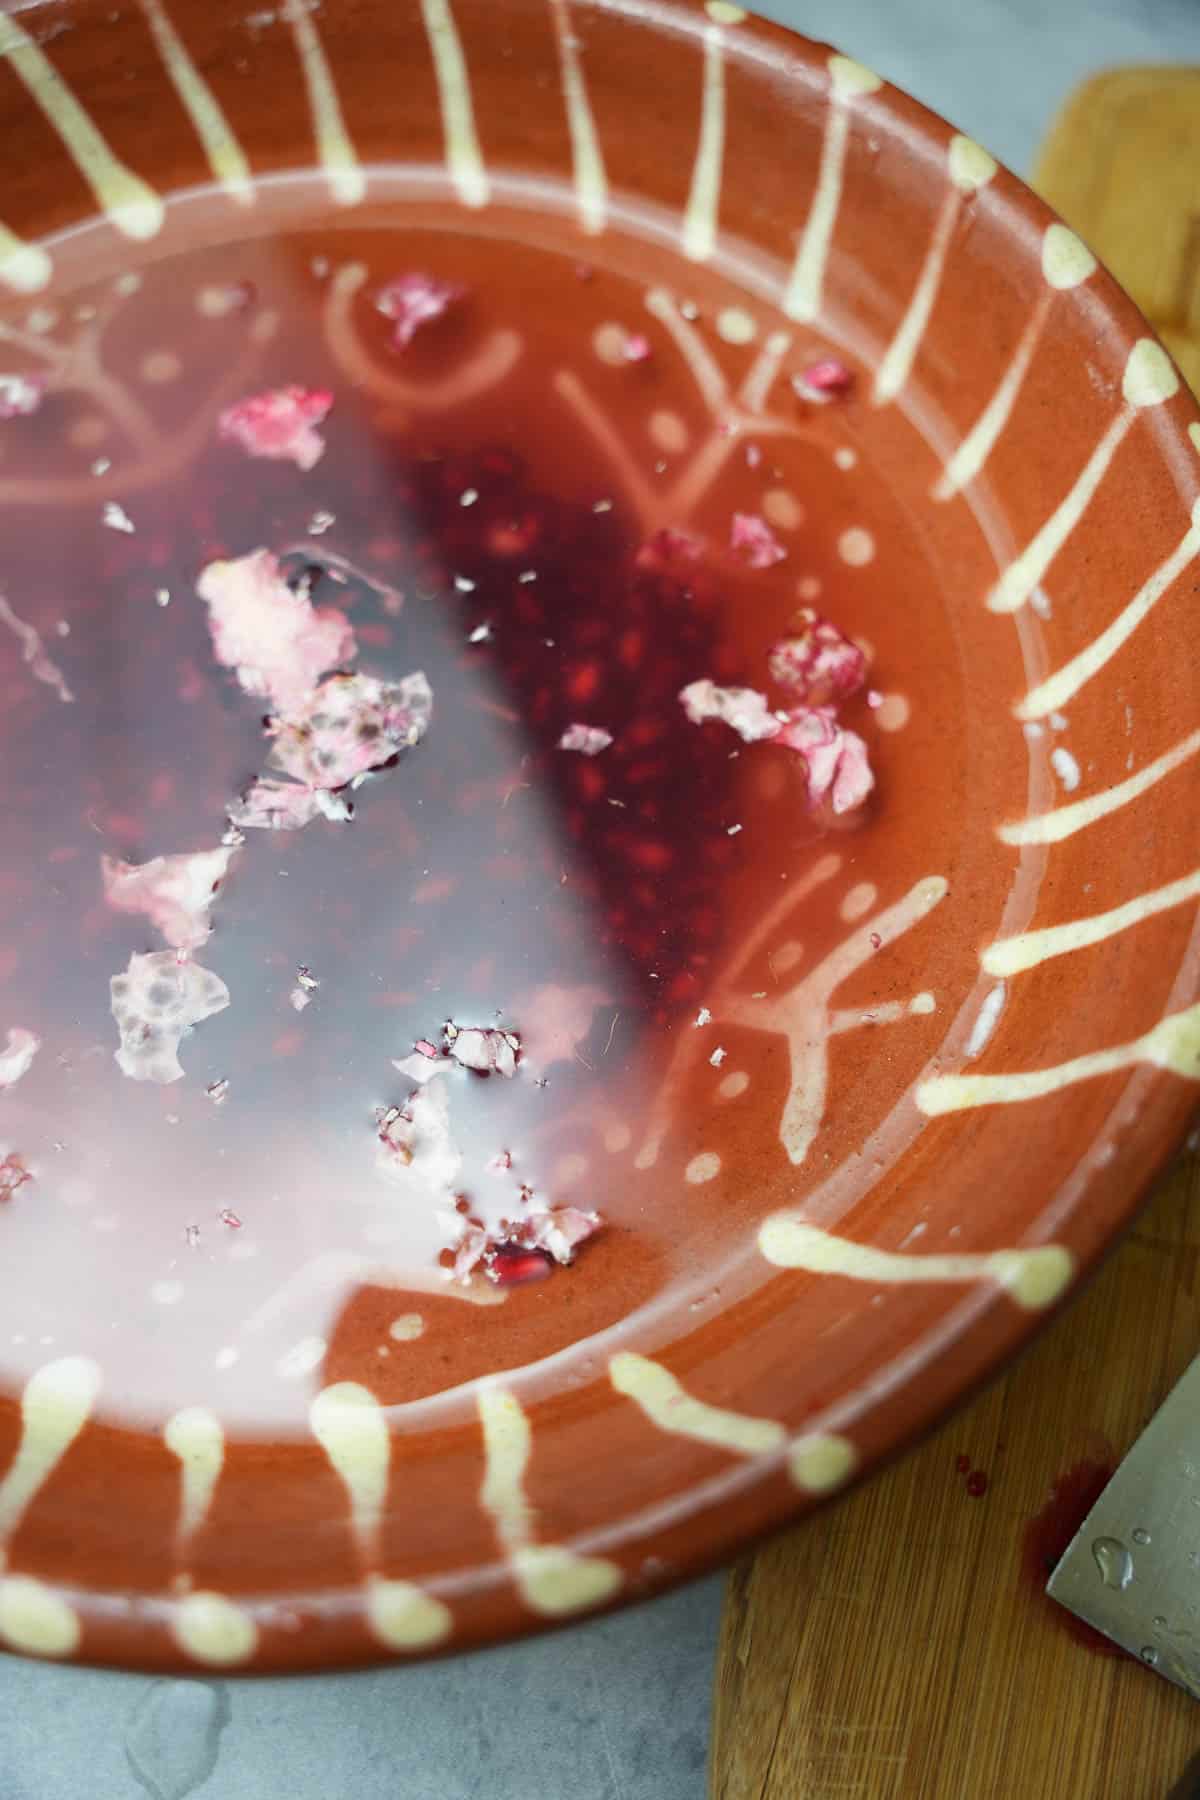 The pomegranate seeds are sperated from the flesh of the pomegranate in a bowl of water. the seeds sink and the pith rises to the surface to be discarded.